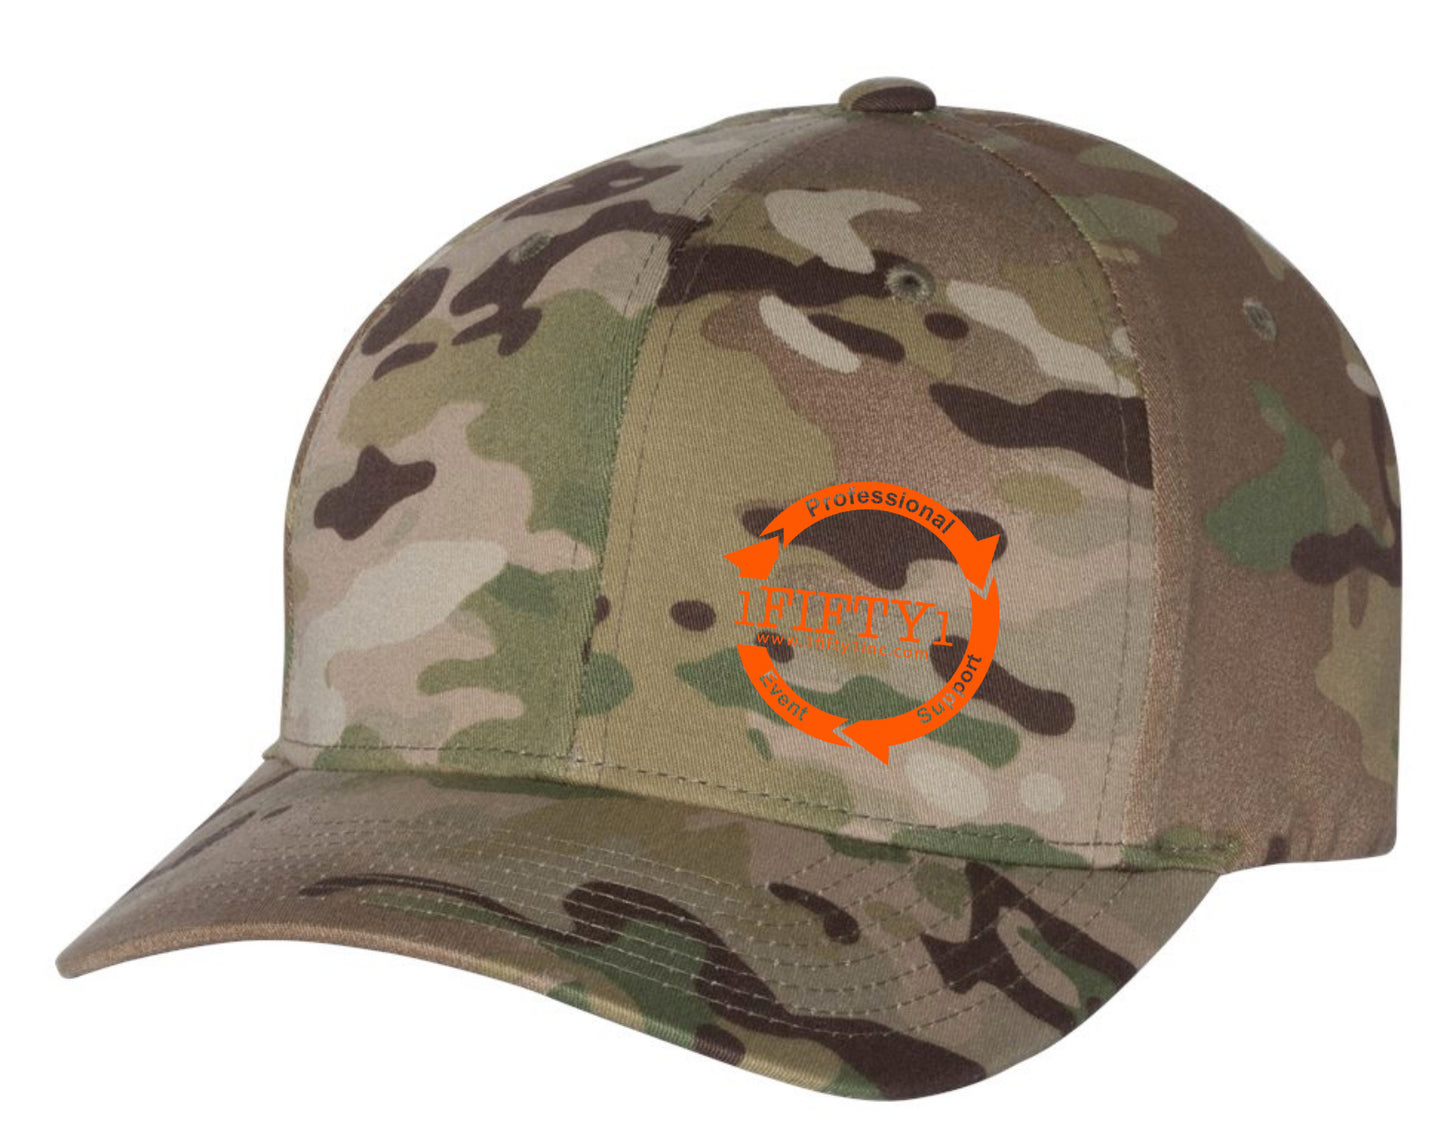 1Fifty1 *Embroidered Logo Flexfit (Camo)